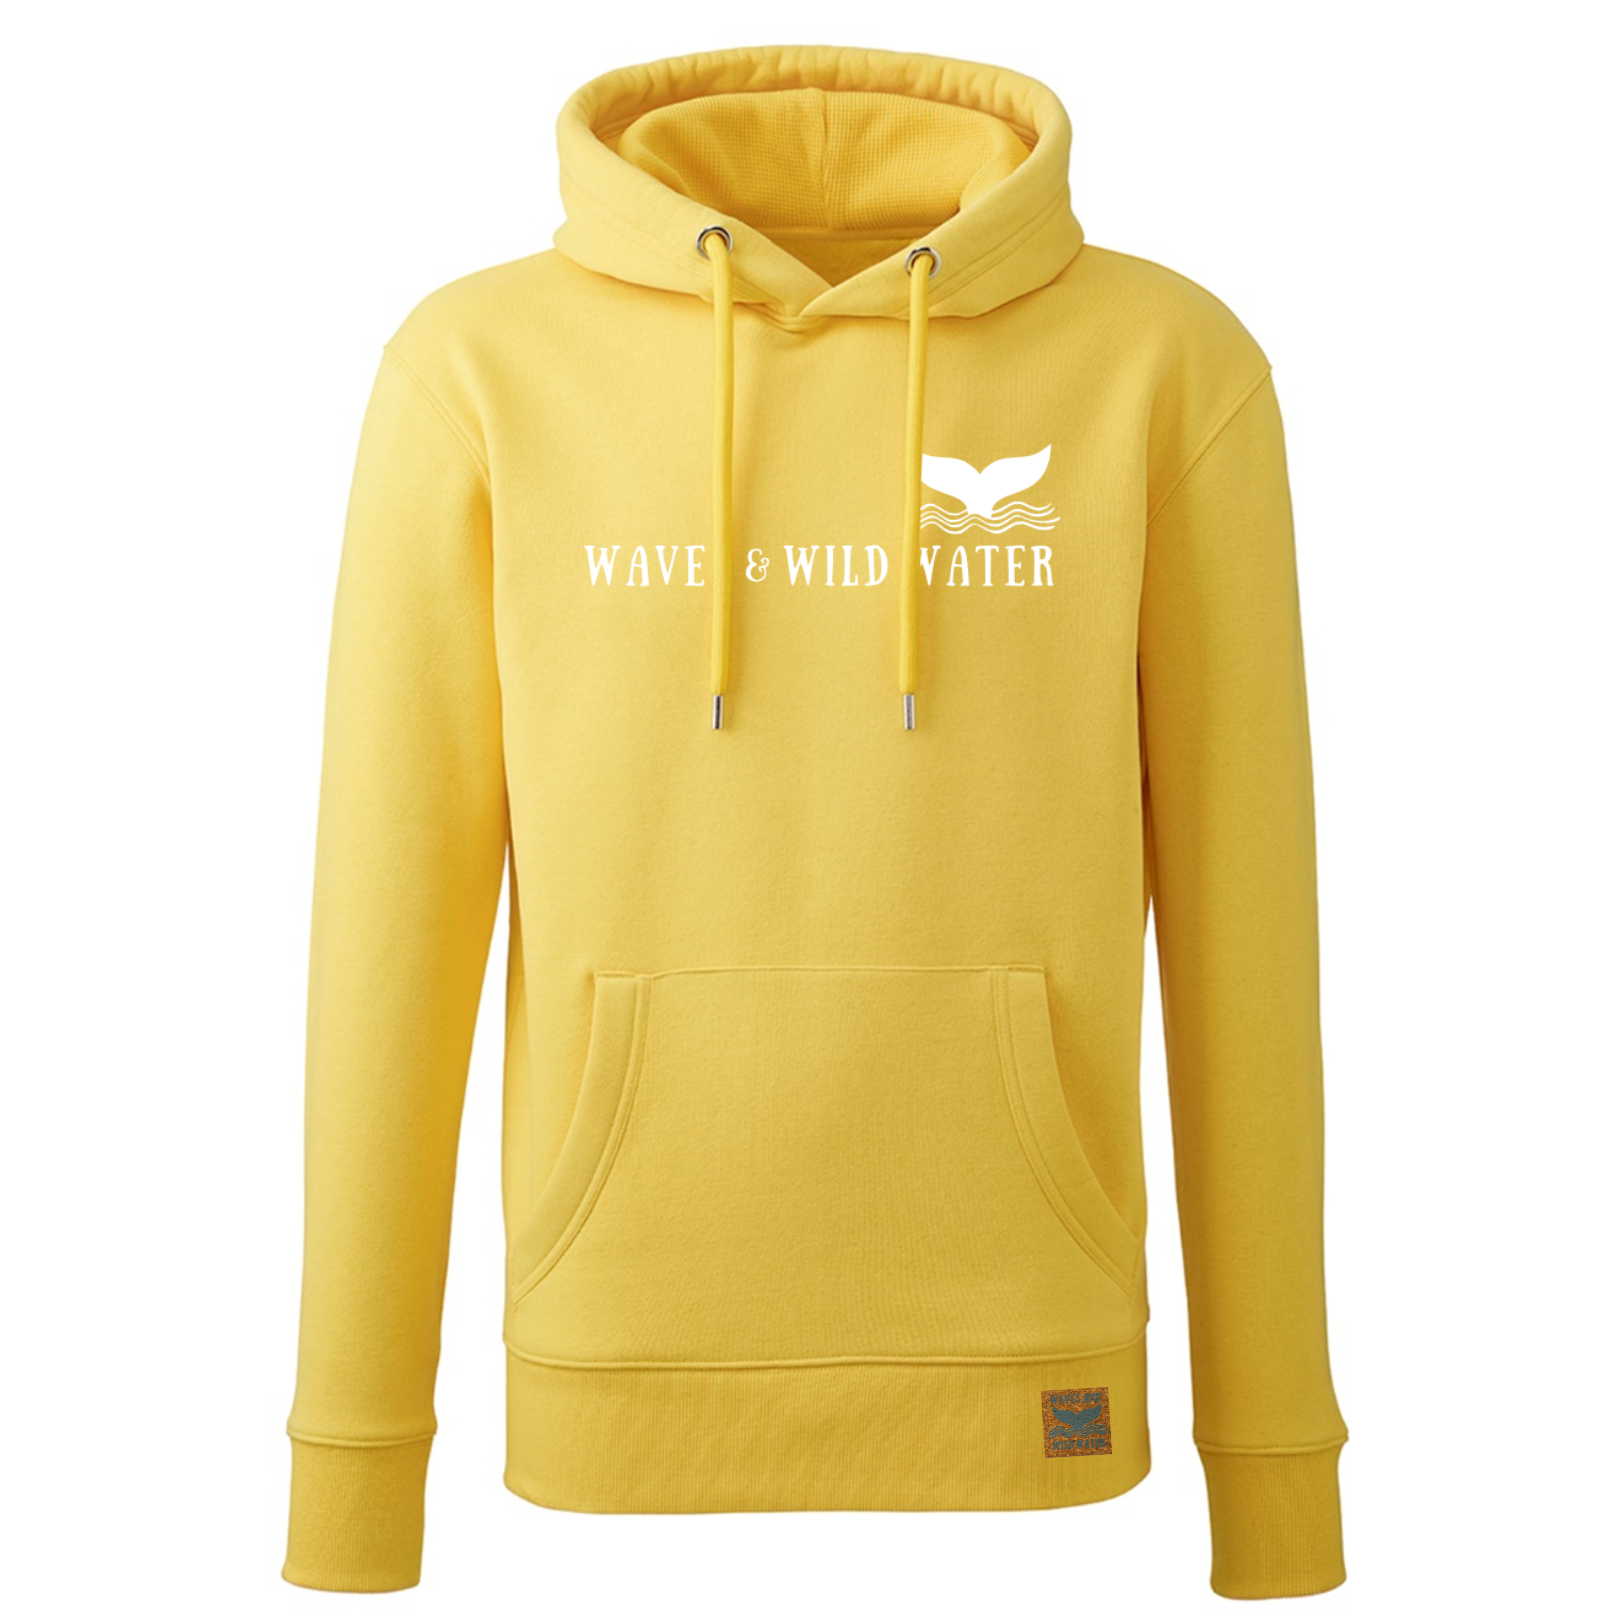 We love to be seen in our bright yellow hoodie from our Beach Hut Hoodies collection. The yellow hoodie contrasts beautifully with the crisp white hand printed Waves and Wild Water logo across the front. We like to wear ours after a cold water plunge or a dip in the sea. 